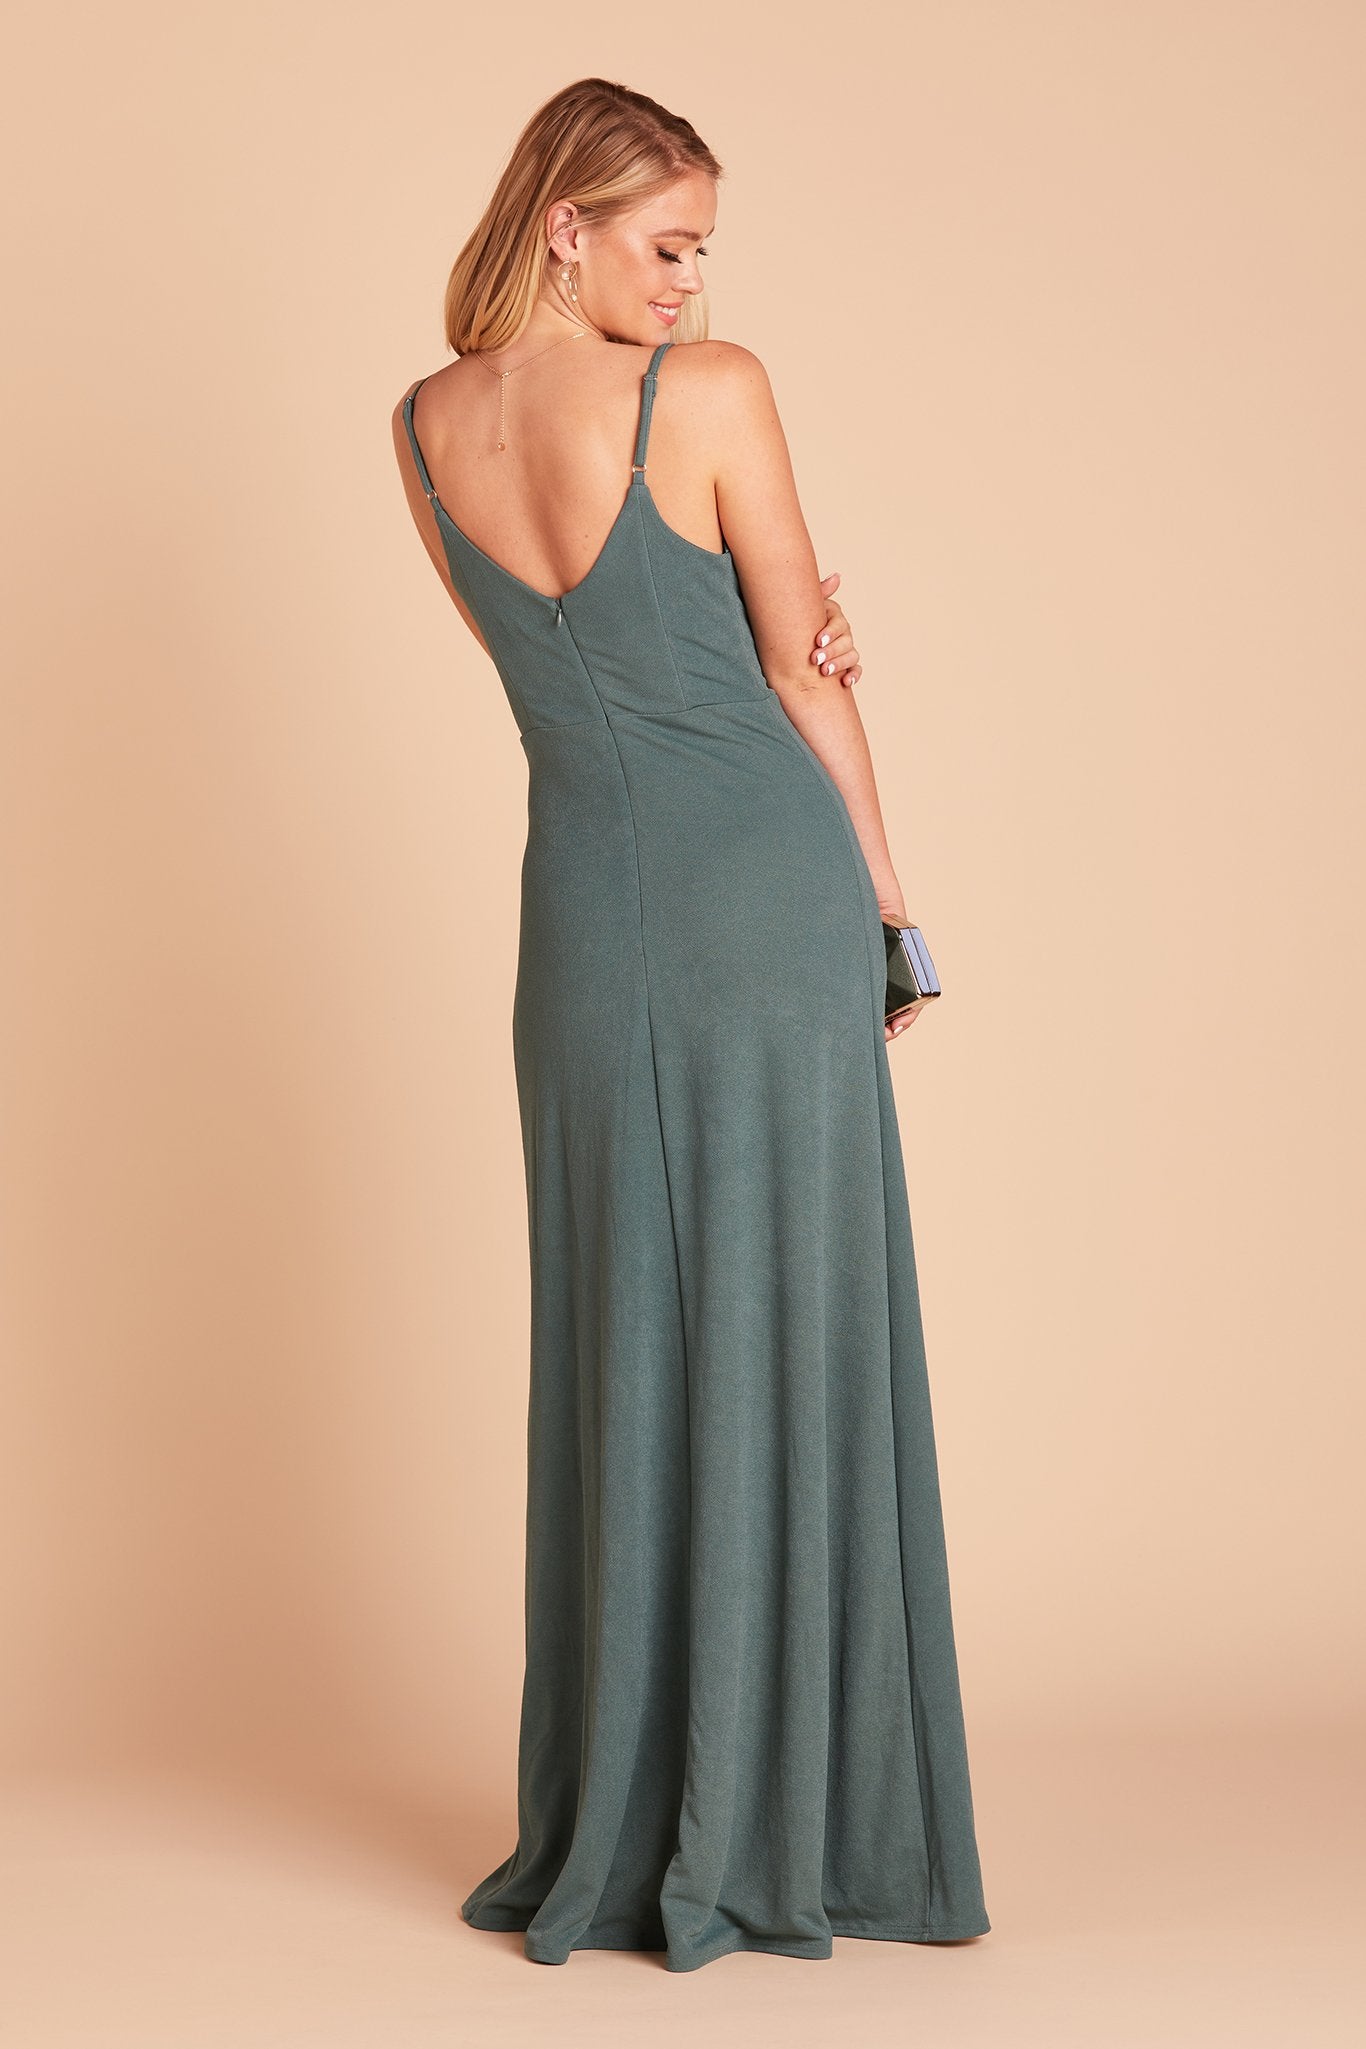 Jay bridesmaid dress with slit in sea glass green crepe by Birdy Grey, back view